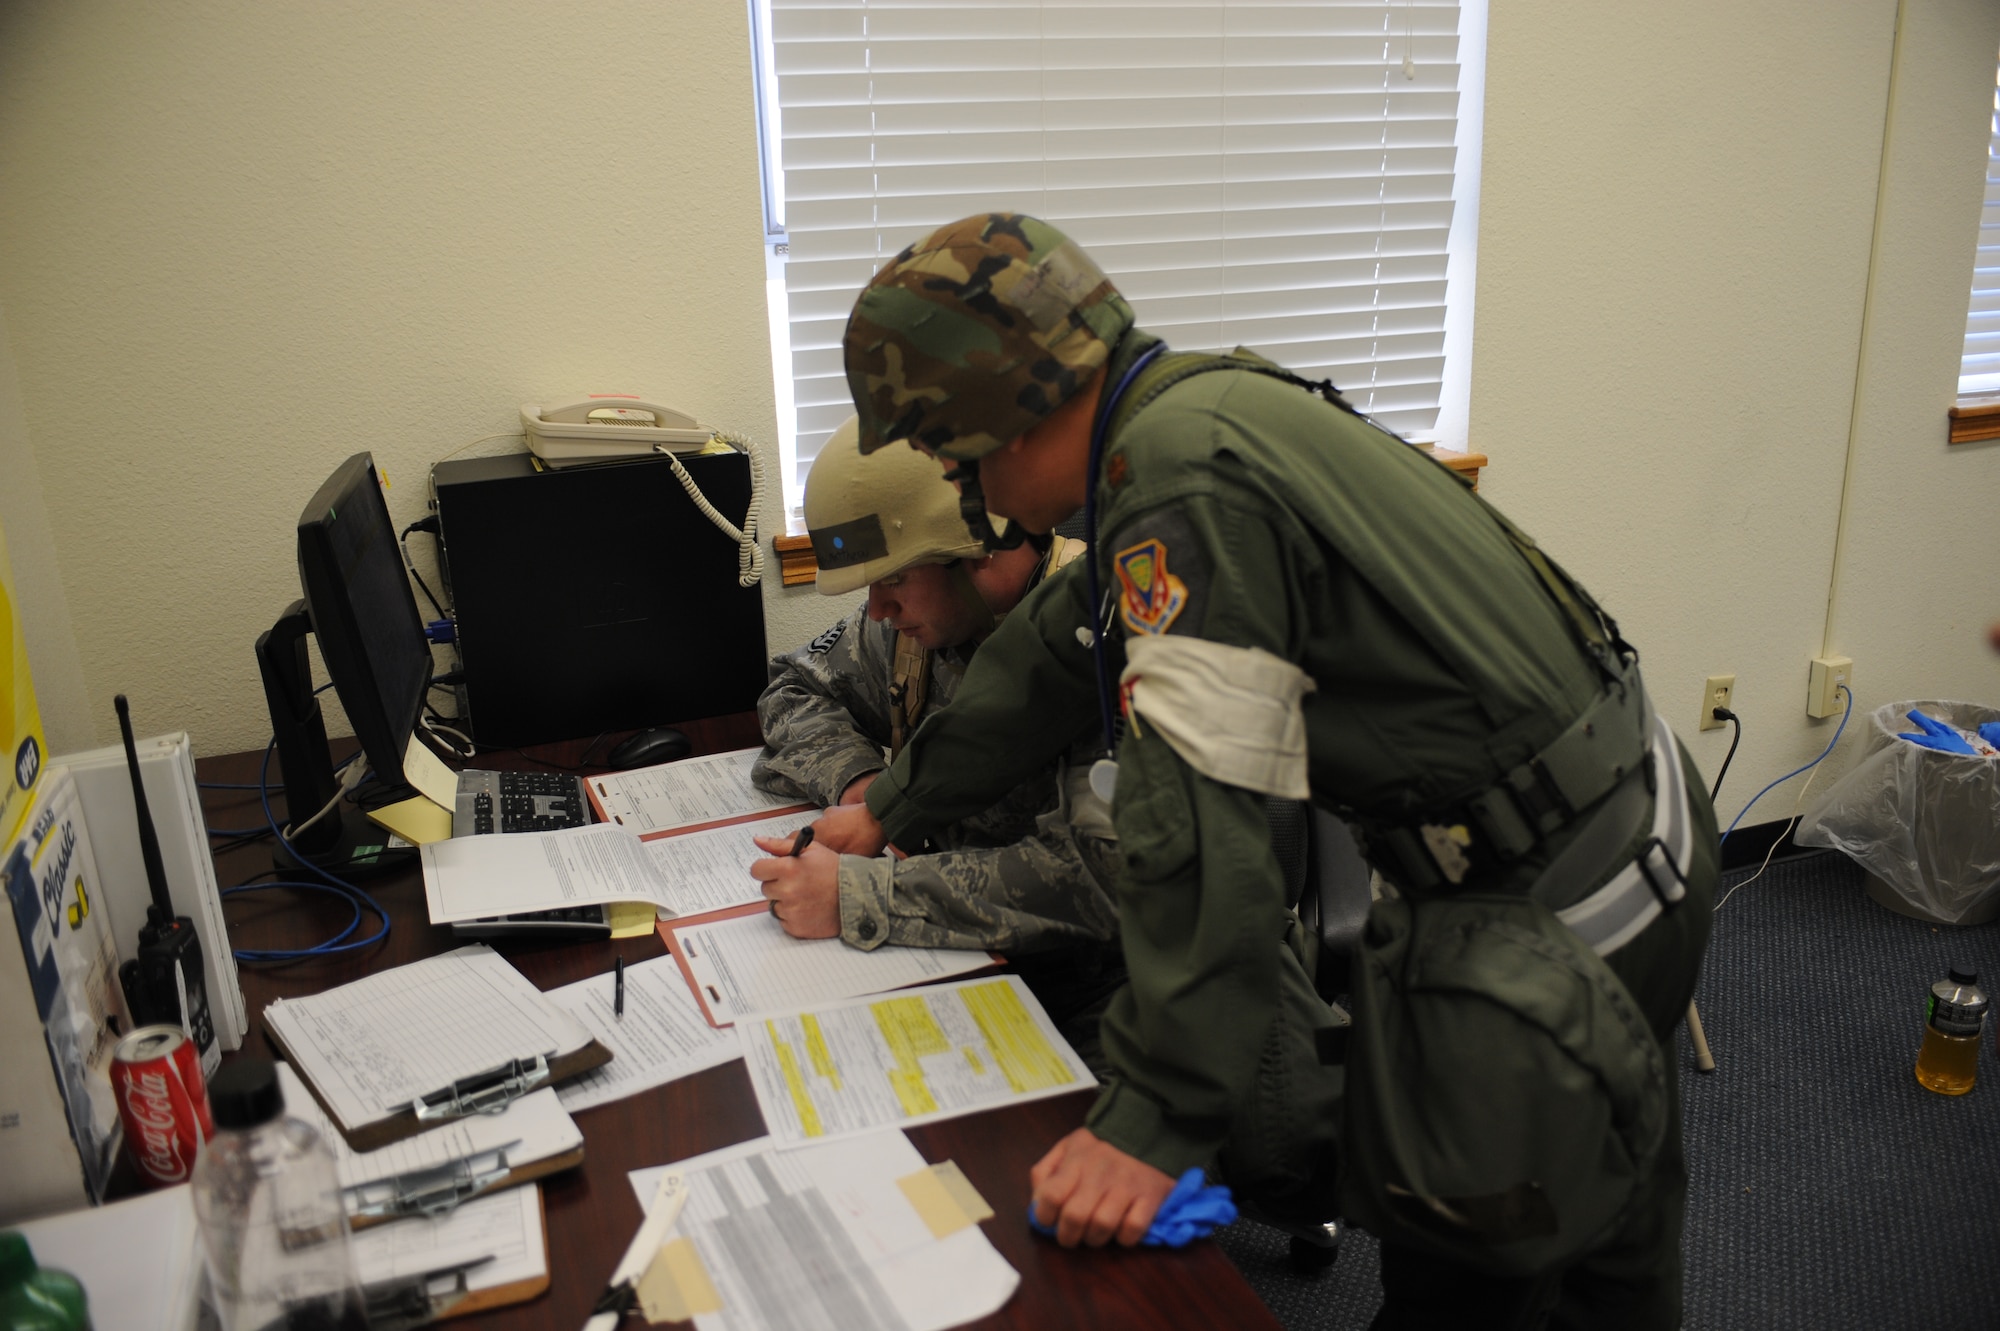 U.S. Air Force Maj. Kevin Loh, 366th Medical Group flight surgeon and Staff Sgt. Michael Montgomery, 366th MDG medic, coordinate a medical evacuation for patients inside the treatment facility Feb. 13, 2013, at Mountain Home Air Force Base, Idaho. Paperwork is extremely important and must be filled out correctly in order to ensure mission success and patient safety. (U.S. Air Force photo/Senior Airman Benjamin Sutton)